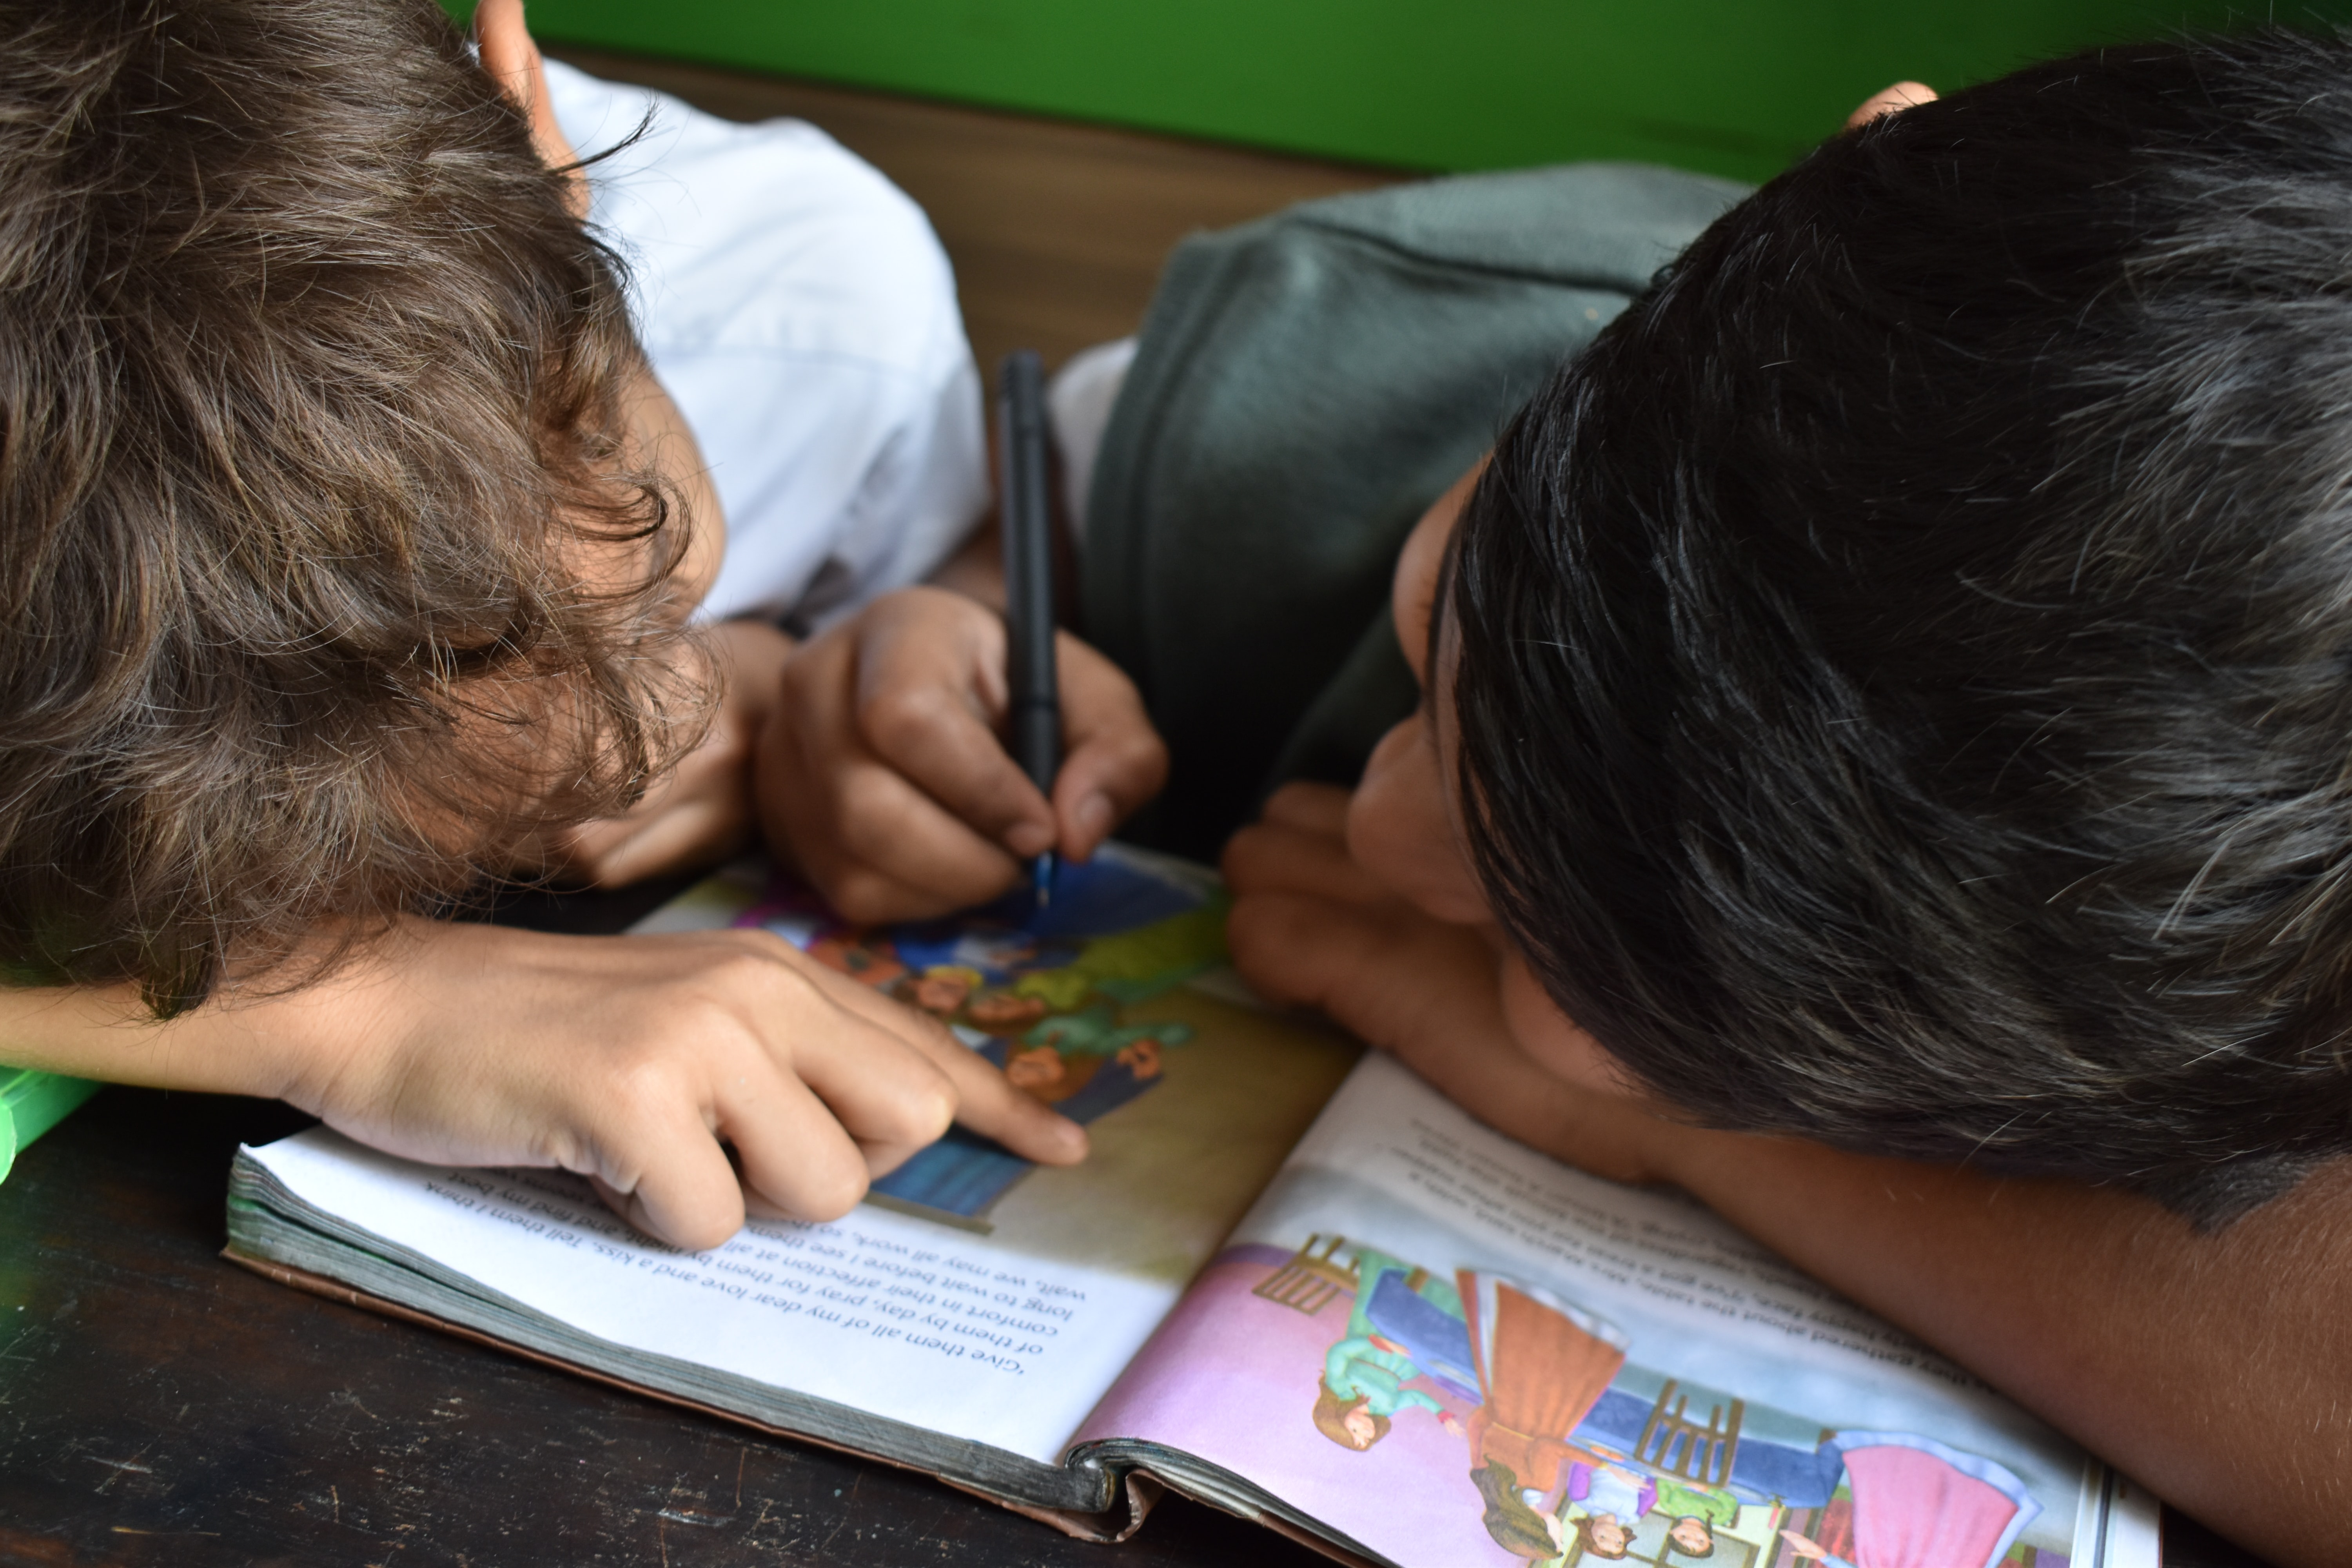 two children leaning over a book together, one using a pen